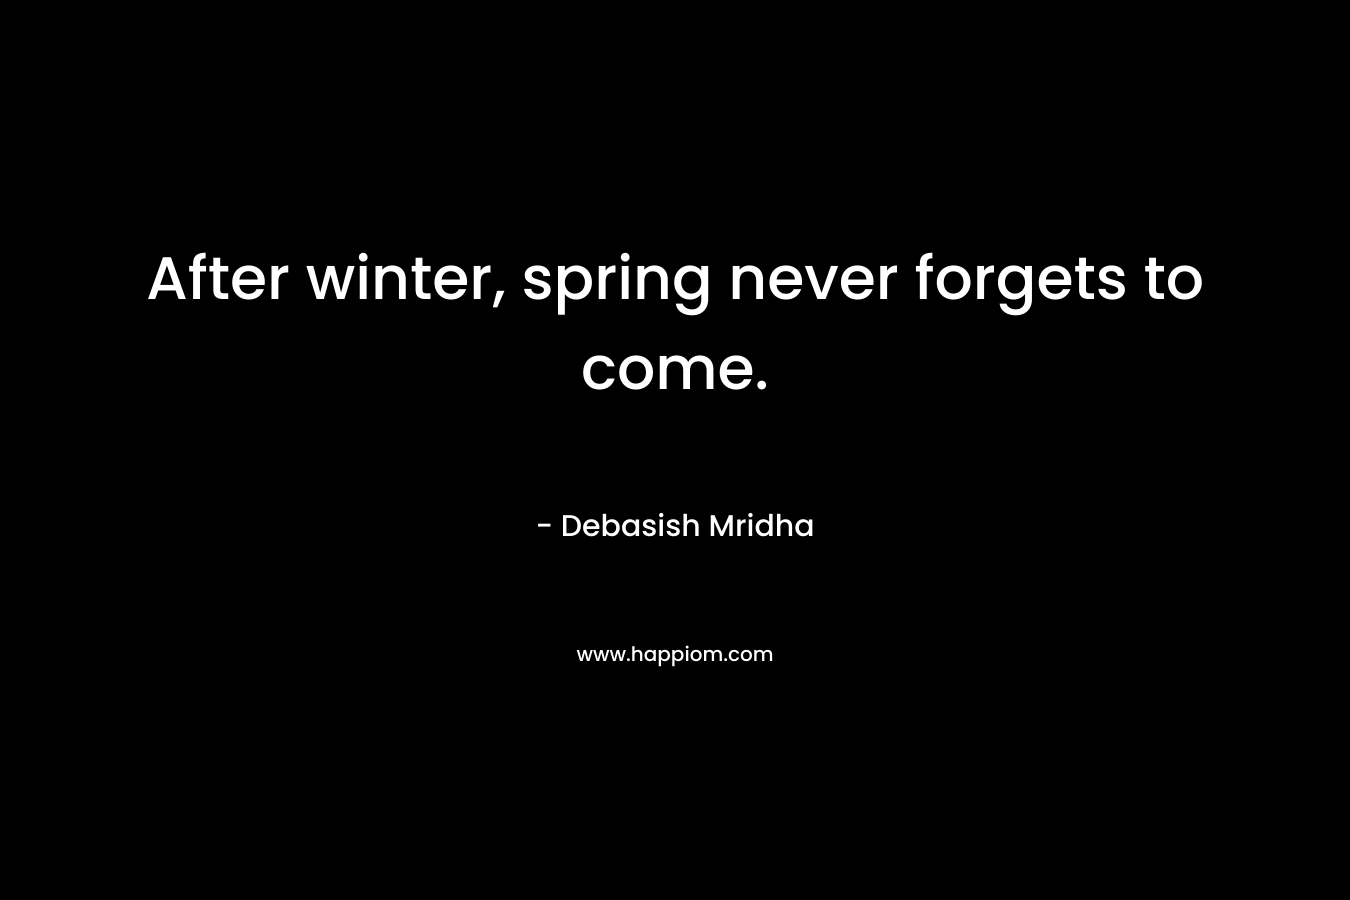 After winter, spring never forgets to come.